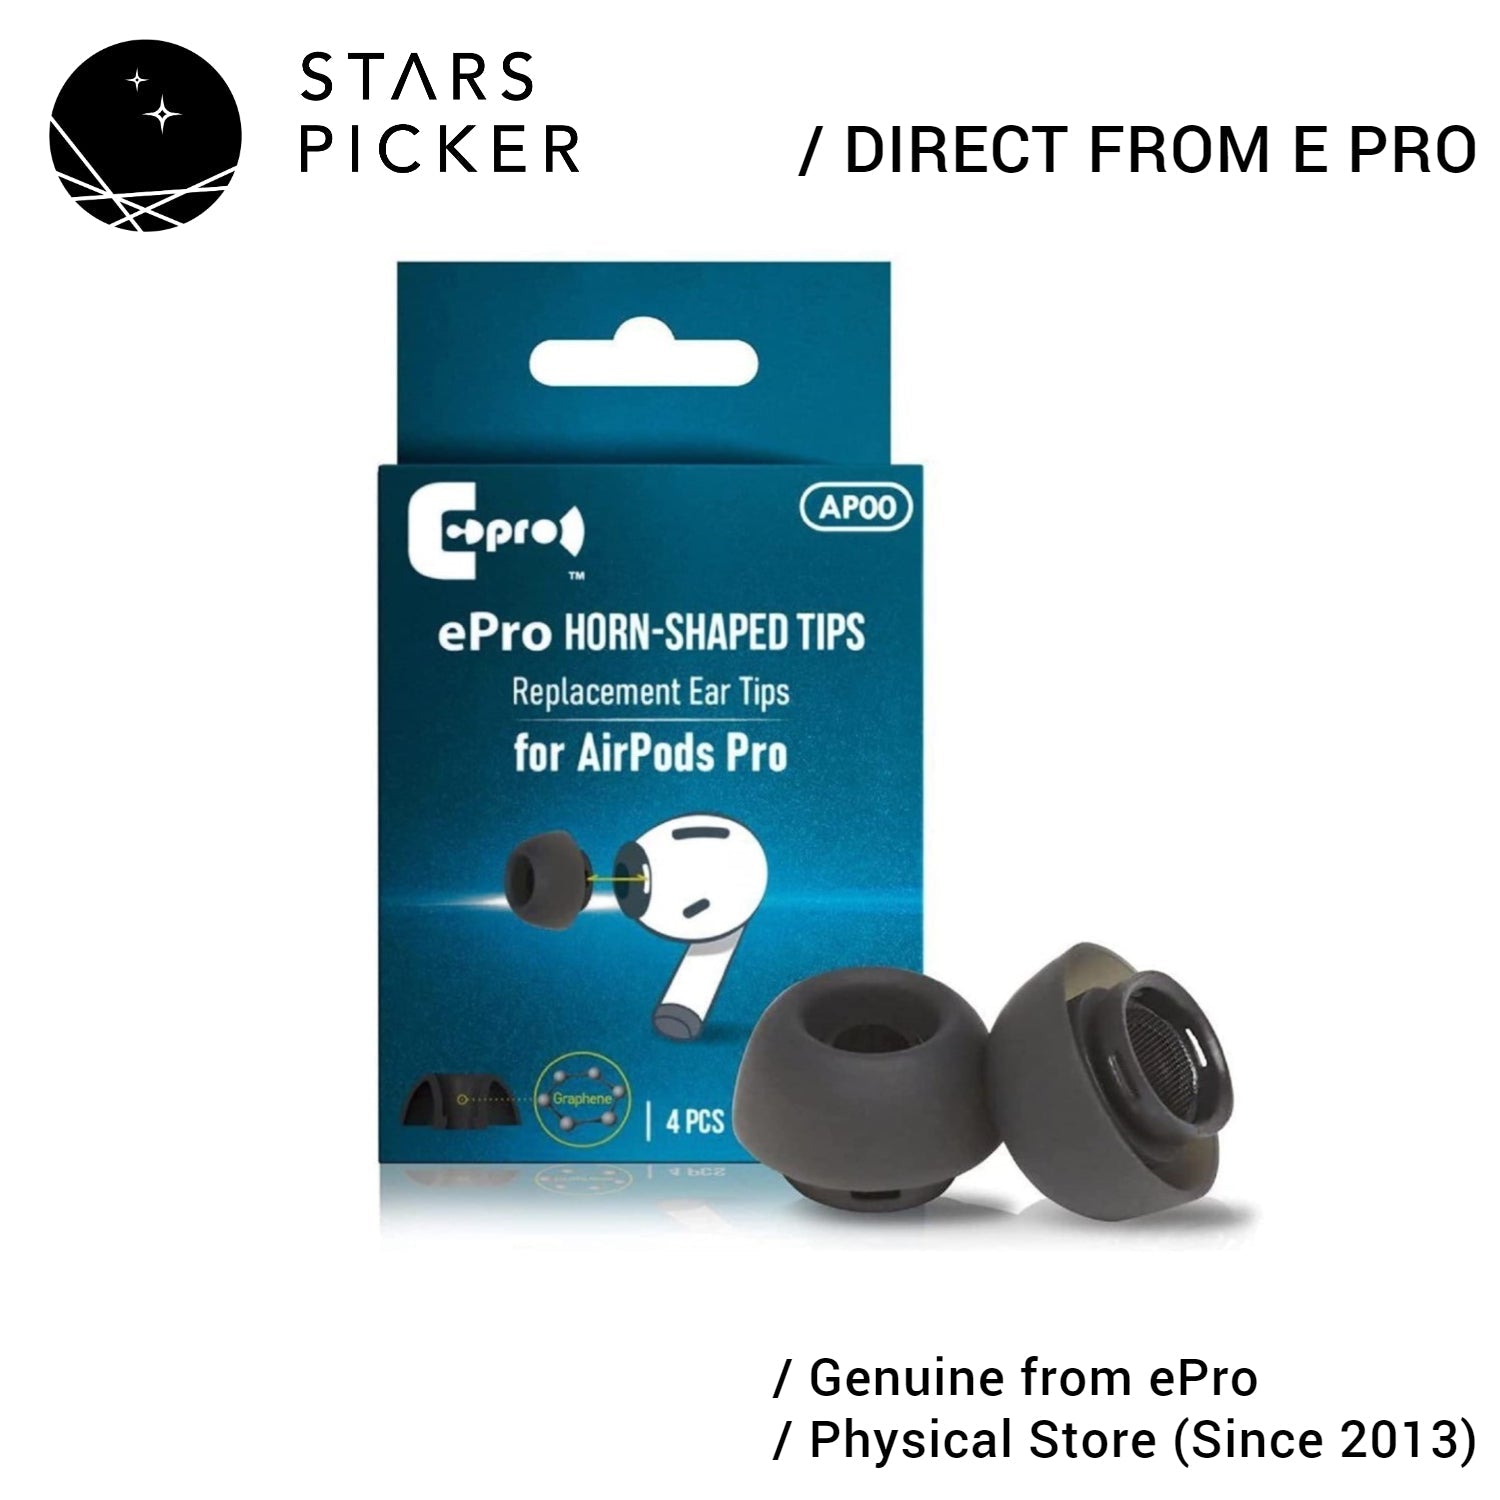 E Pro / ePro AP00 series Horn-shaped Ear Tips - Series Replacement Eartips for APP APP2